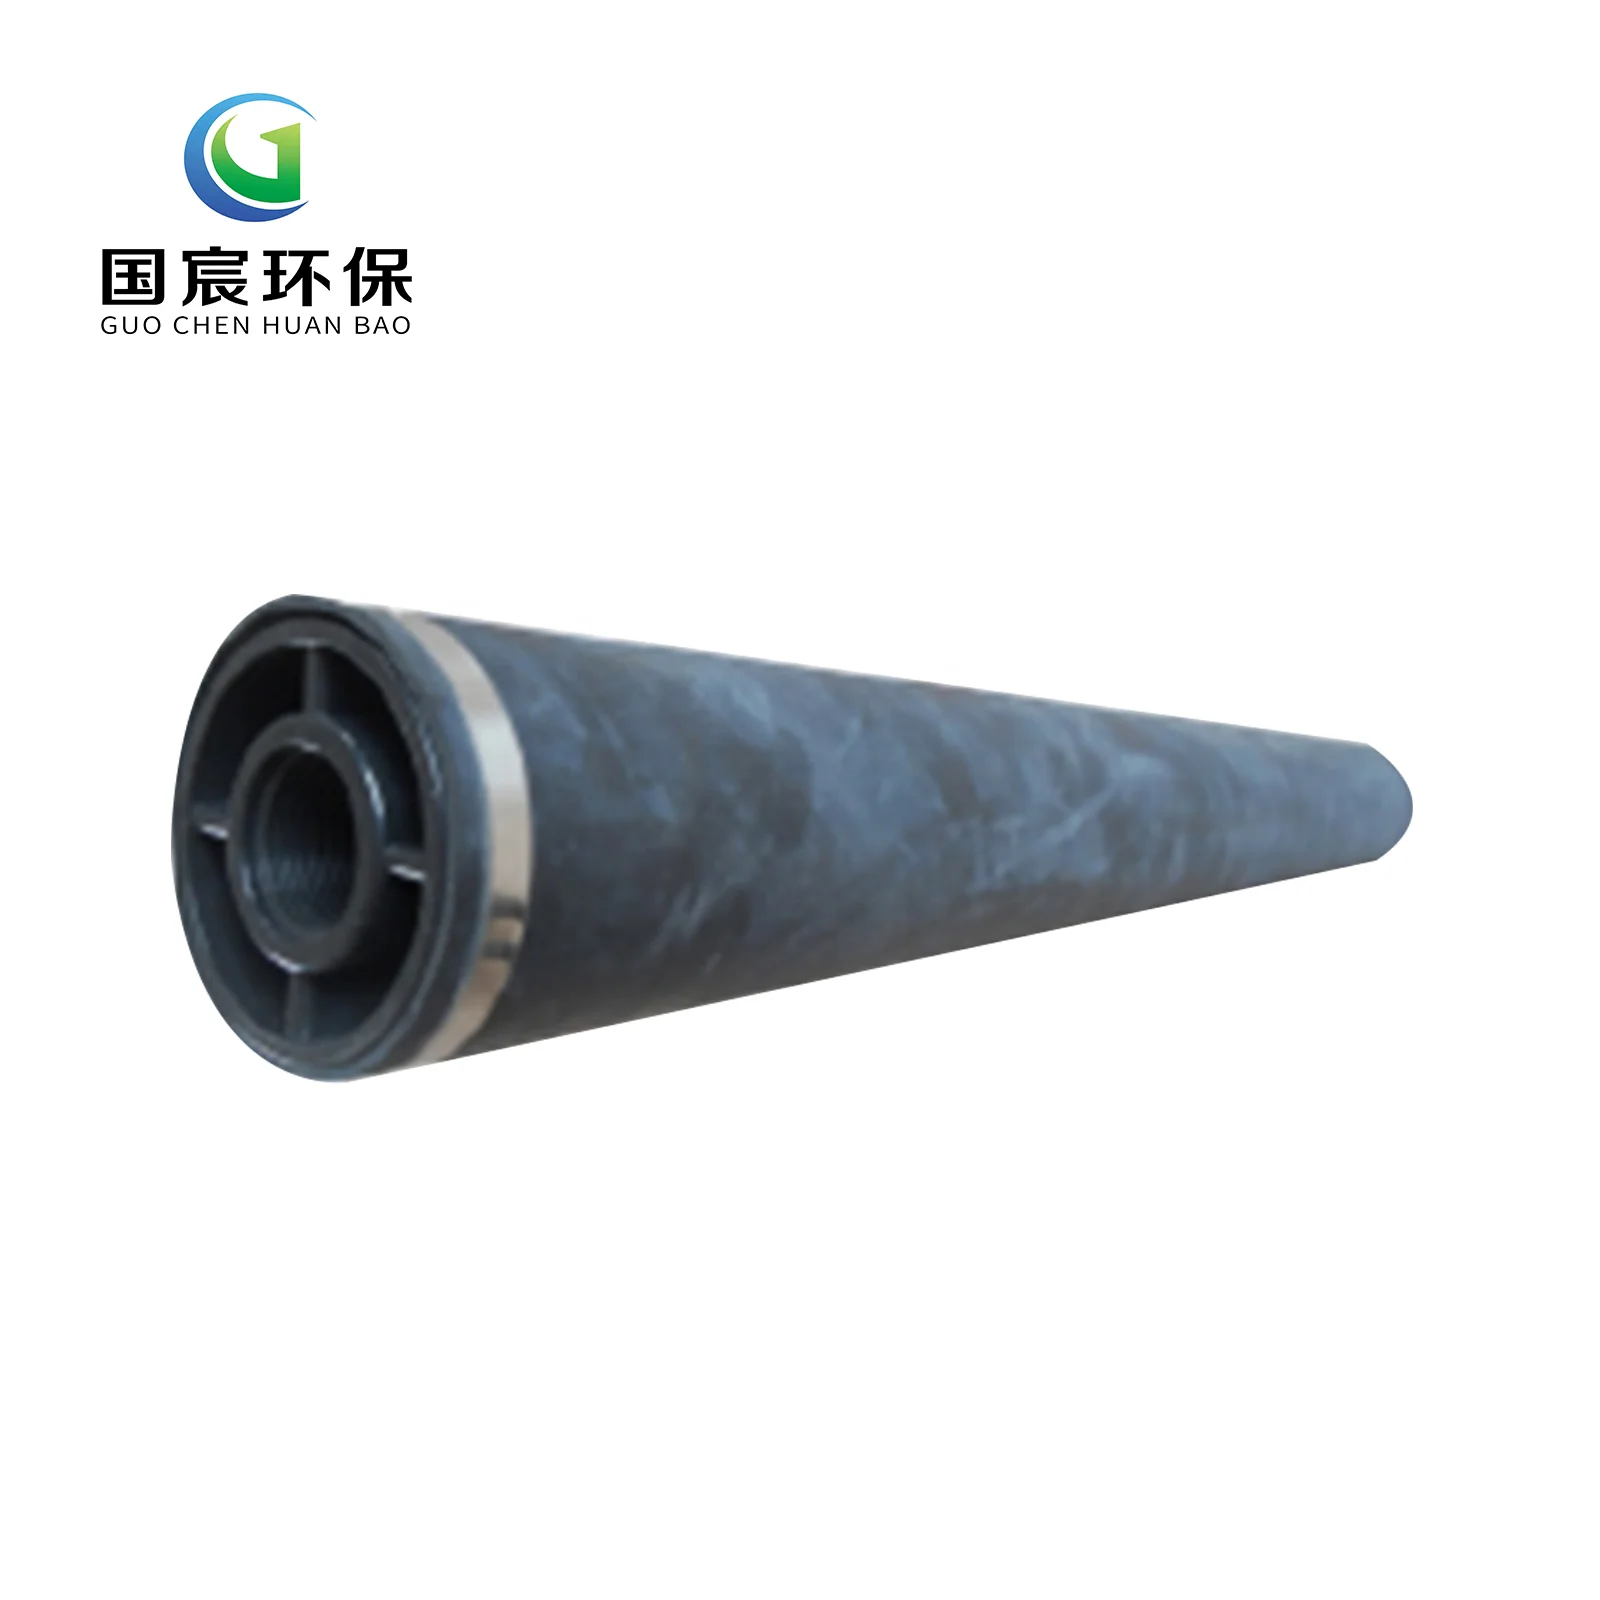 Fine bubble air tubular diffuser aeration bubble air diffuser membrane fine bubble diffuser tube for water treatment